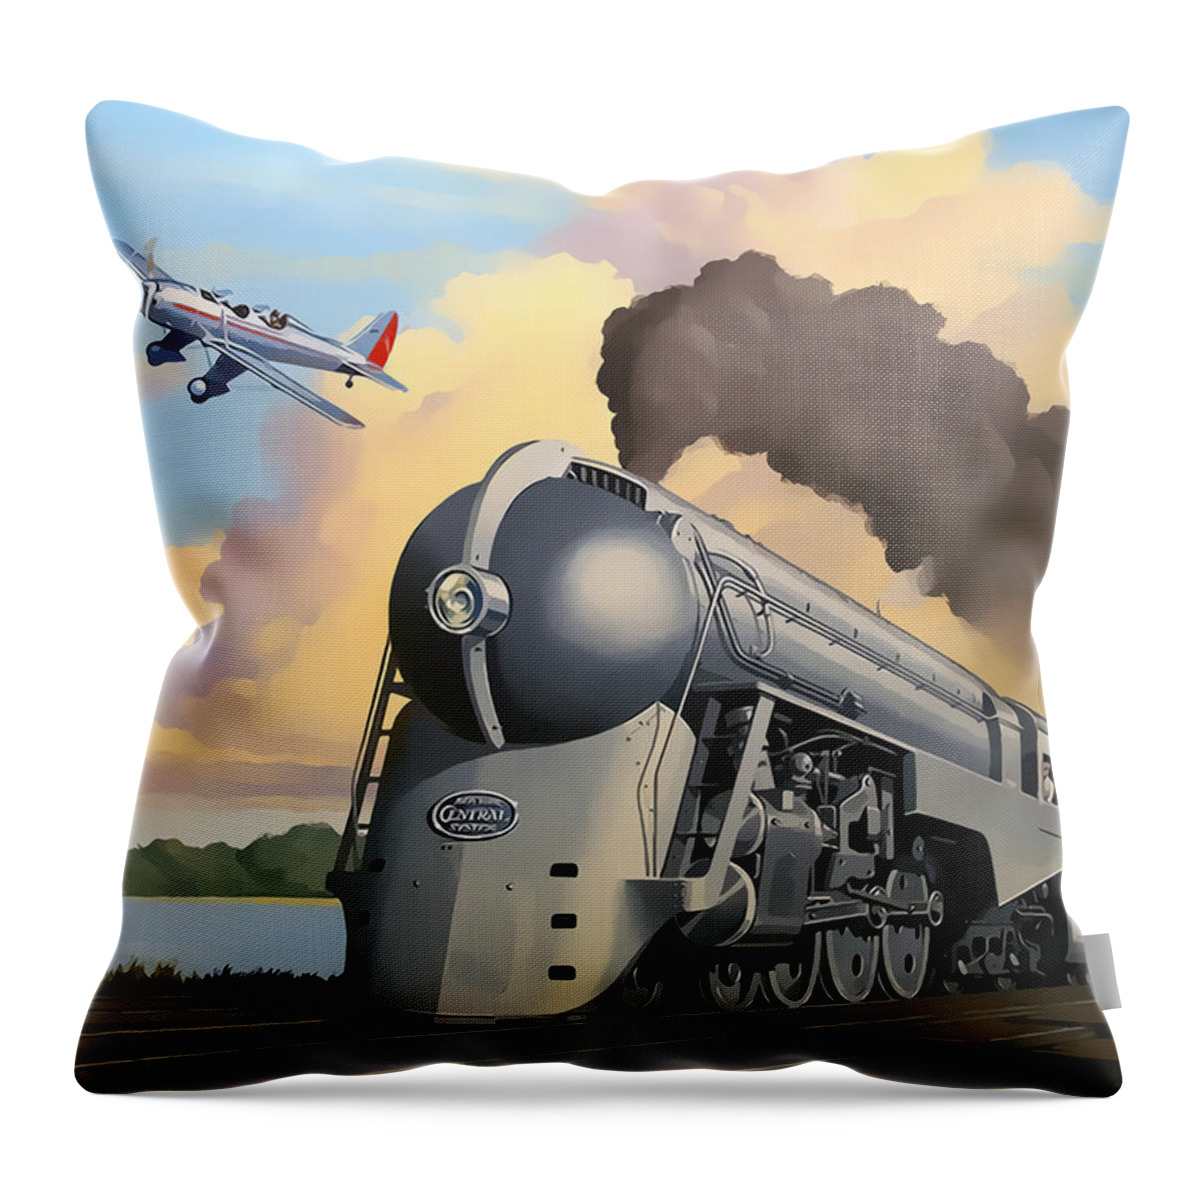 20th Century Limited Throw Pillow featuring the digital art 20th Century Limited and Plane by Chuck Staley